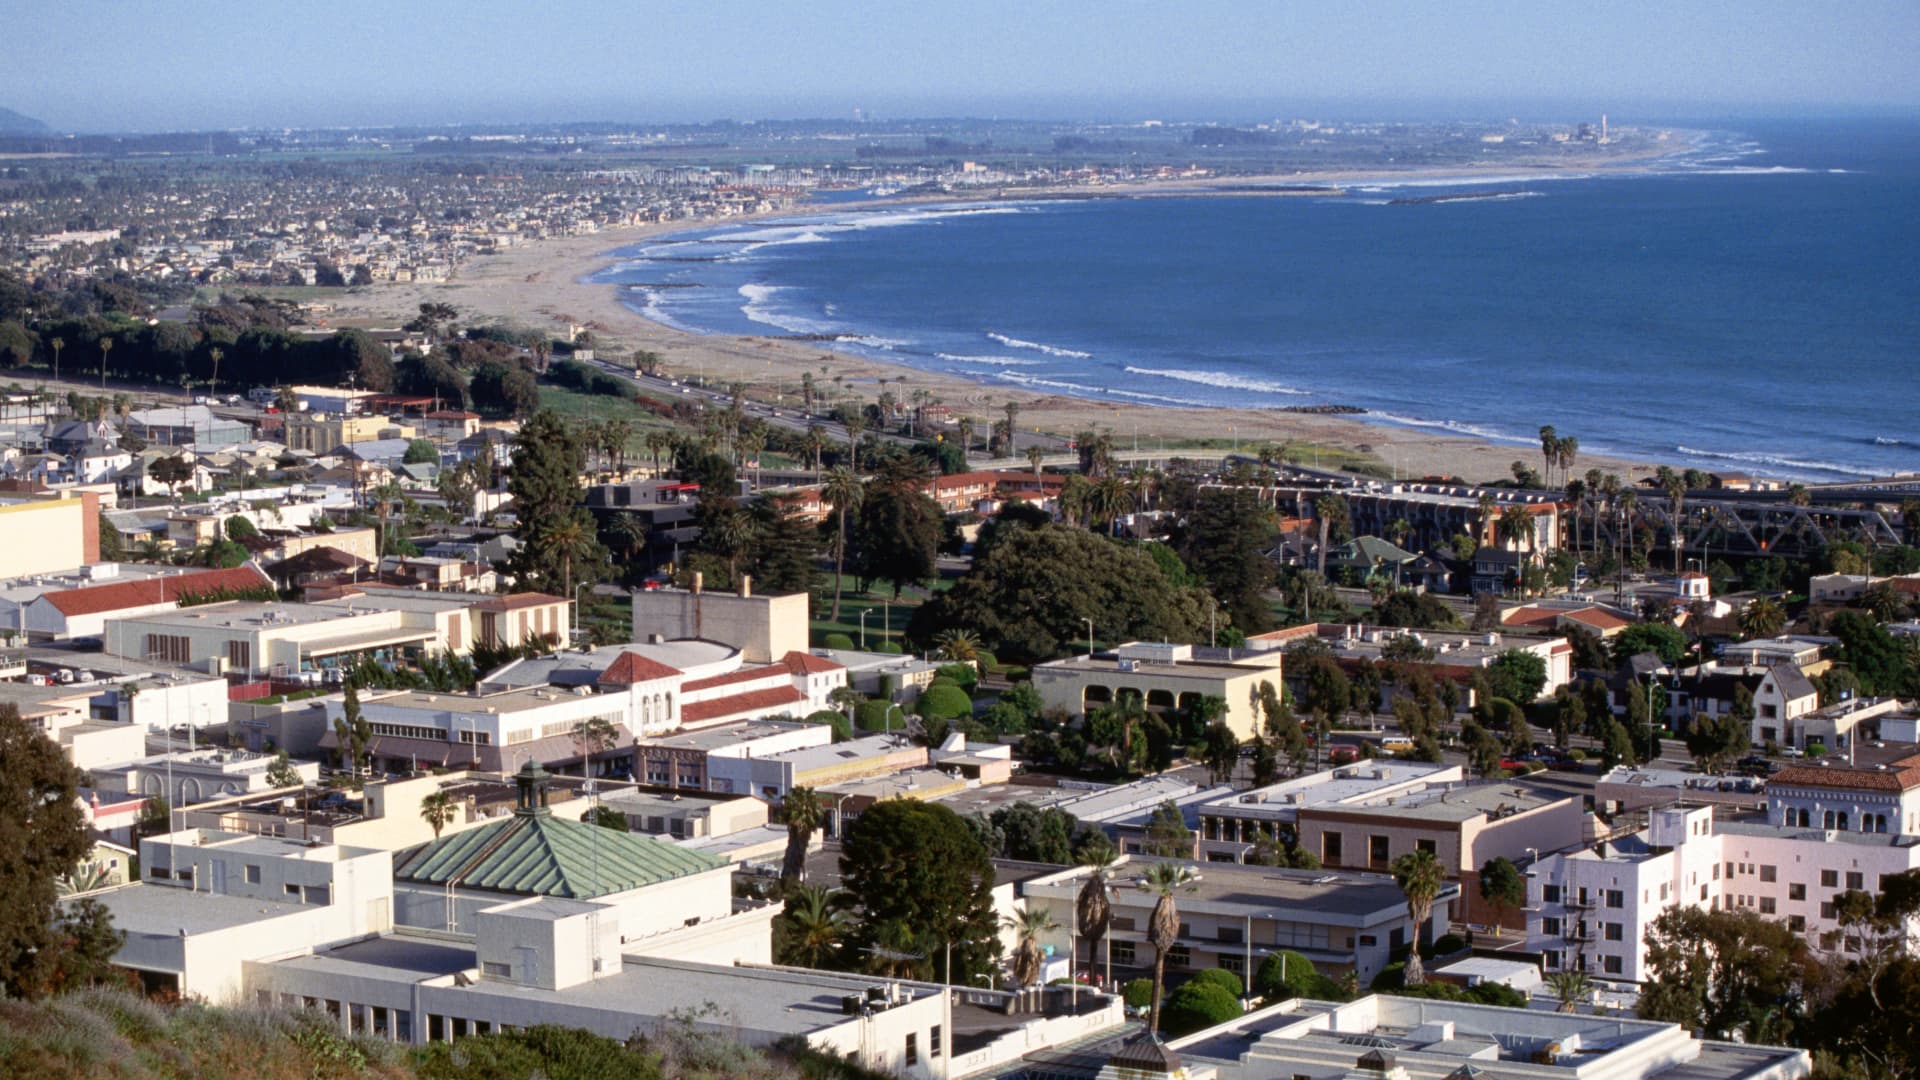 The Oxnard, Thousand Oaks and Ventura area in California ranked third on the list.